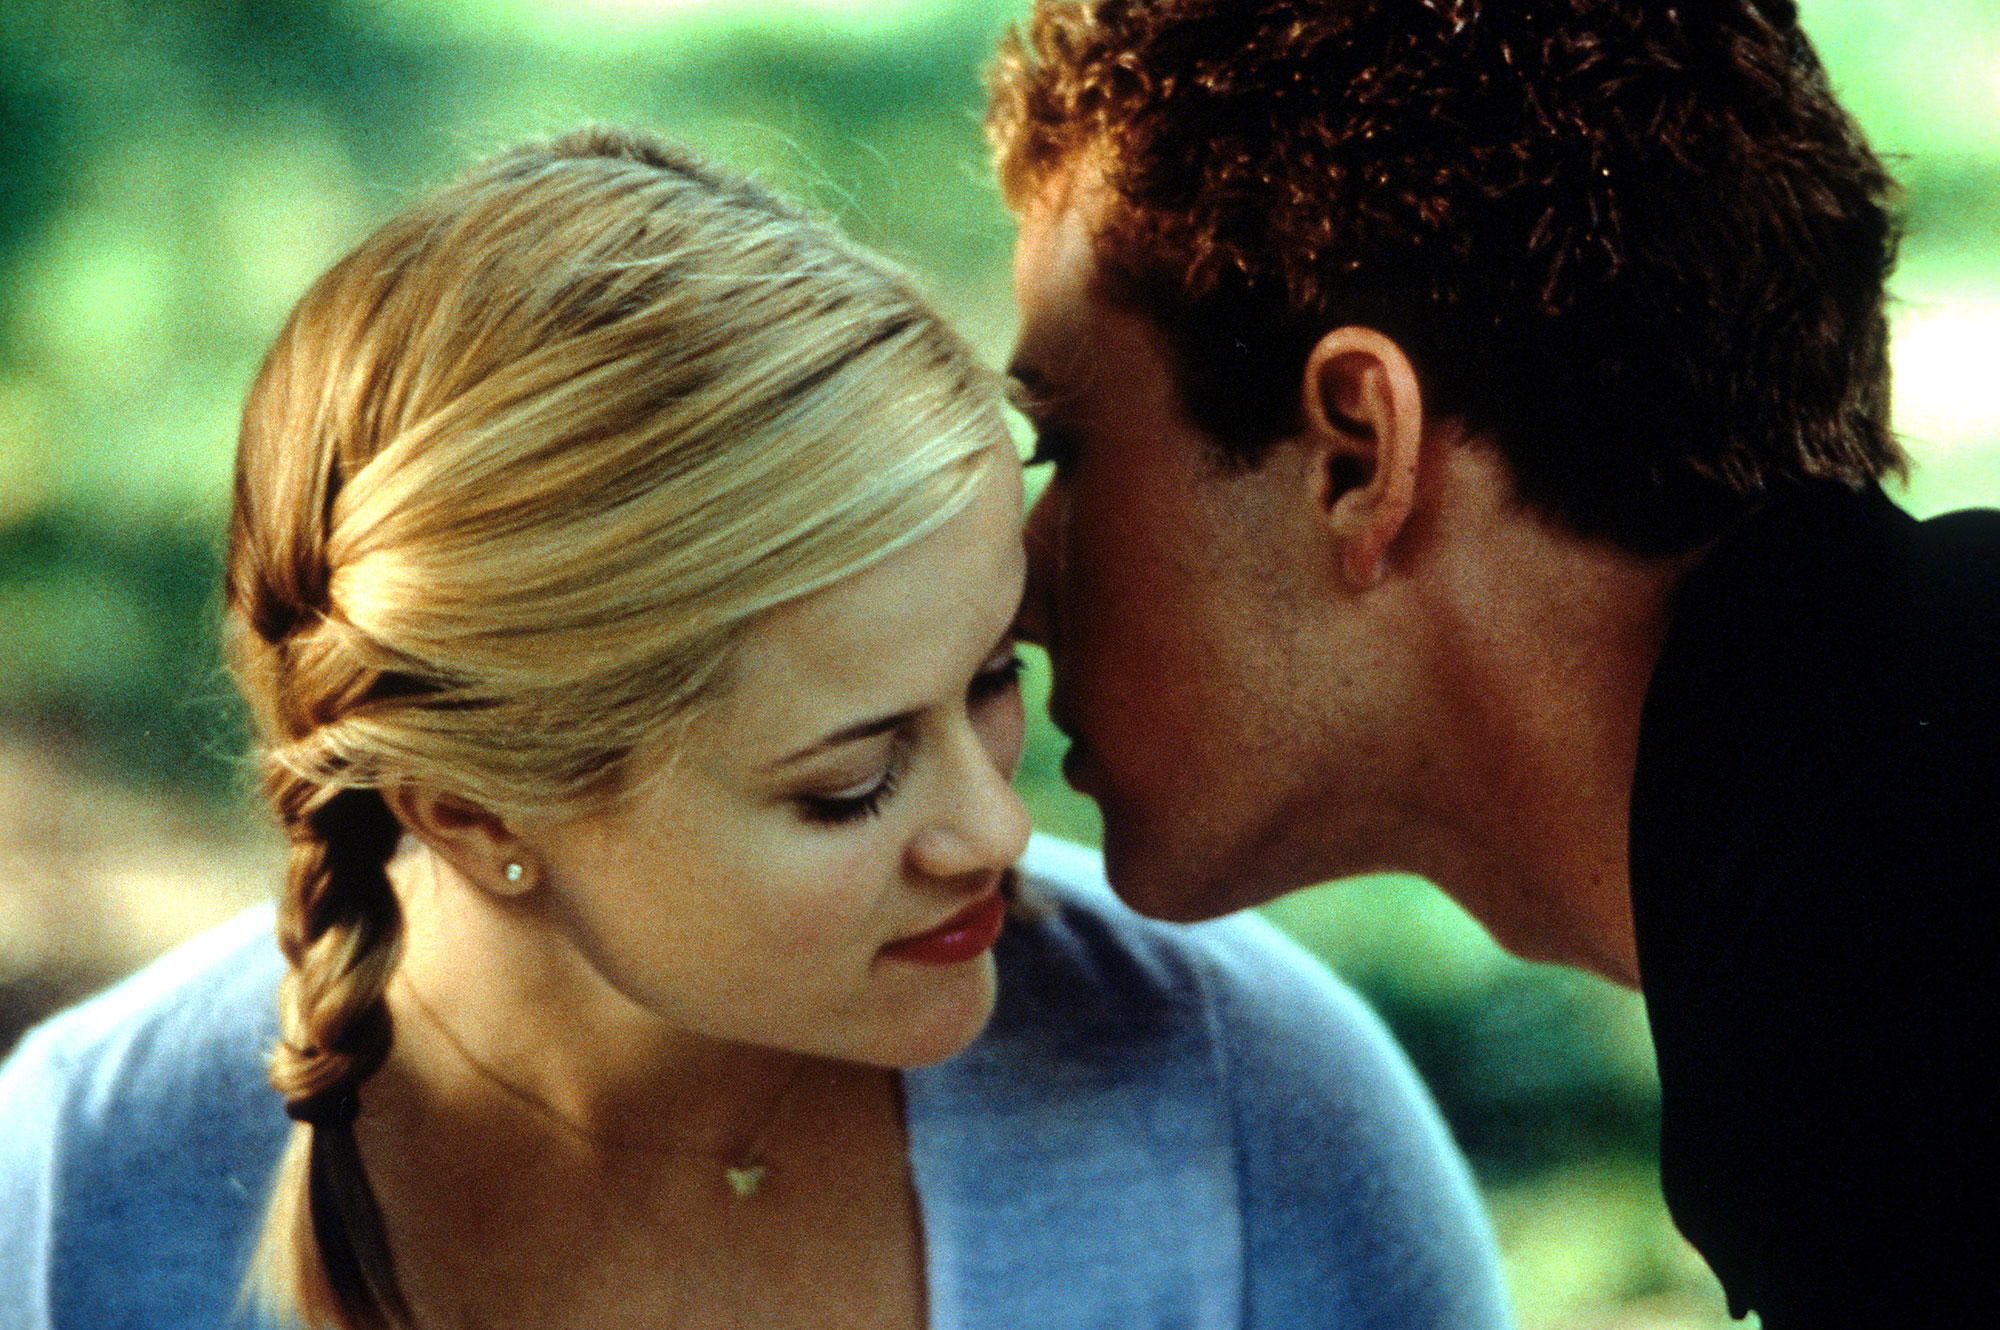 Cruel Intentions' Turns 20: Why It Still Works Today